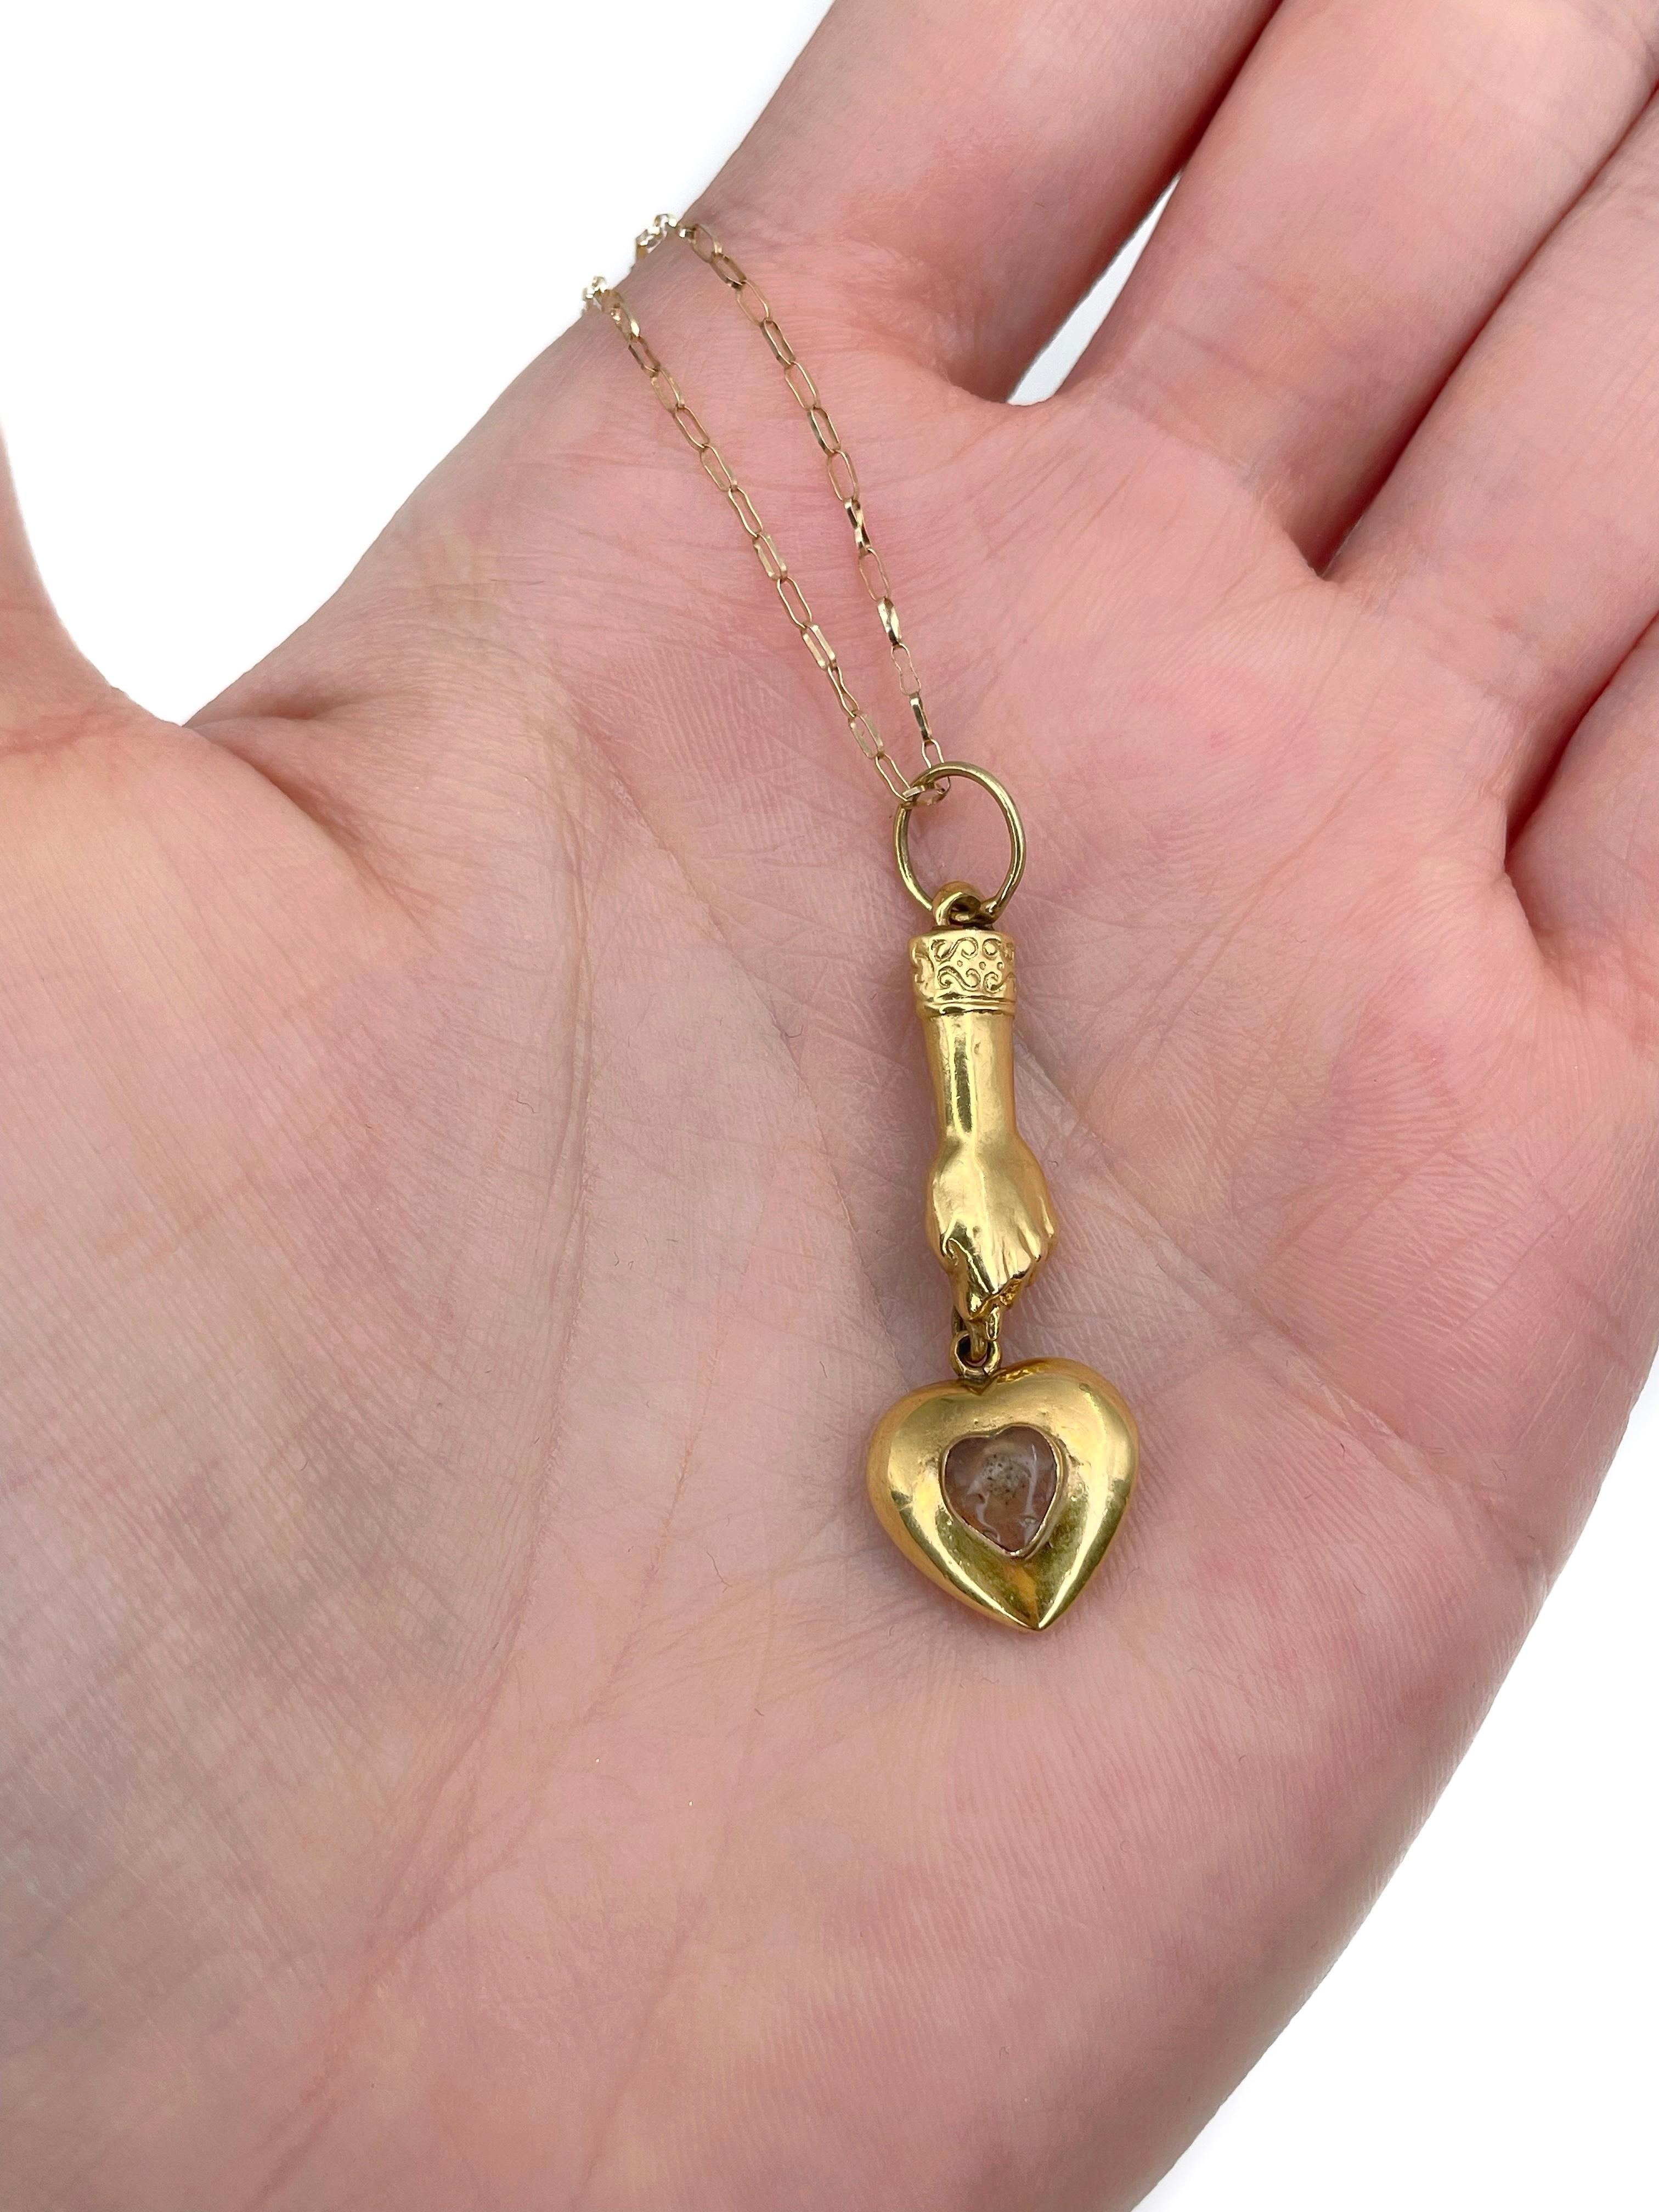 This is a Victorian pendant with a chain crafted in 14K yellow gold. Circa 1890. 

The piece features good luck charm “Mano Figa” and a  heart encrusted with agate. 

Weight: 2.51g
Pendant length: 4cm
Chain length: 45.5cm

———

If you have any